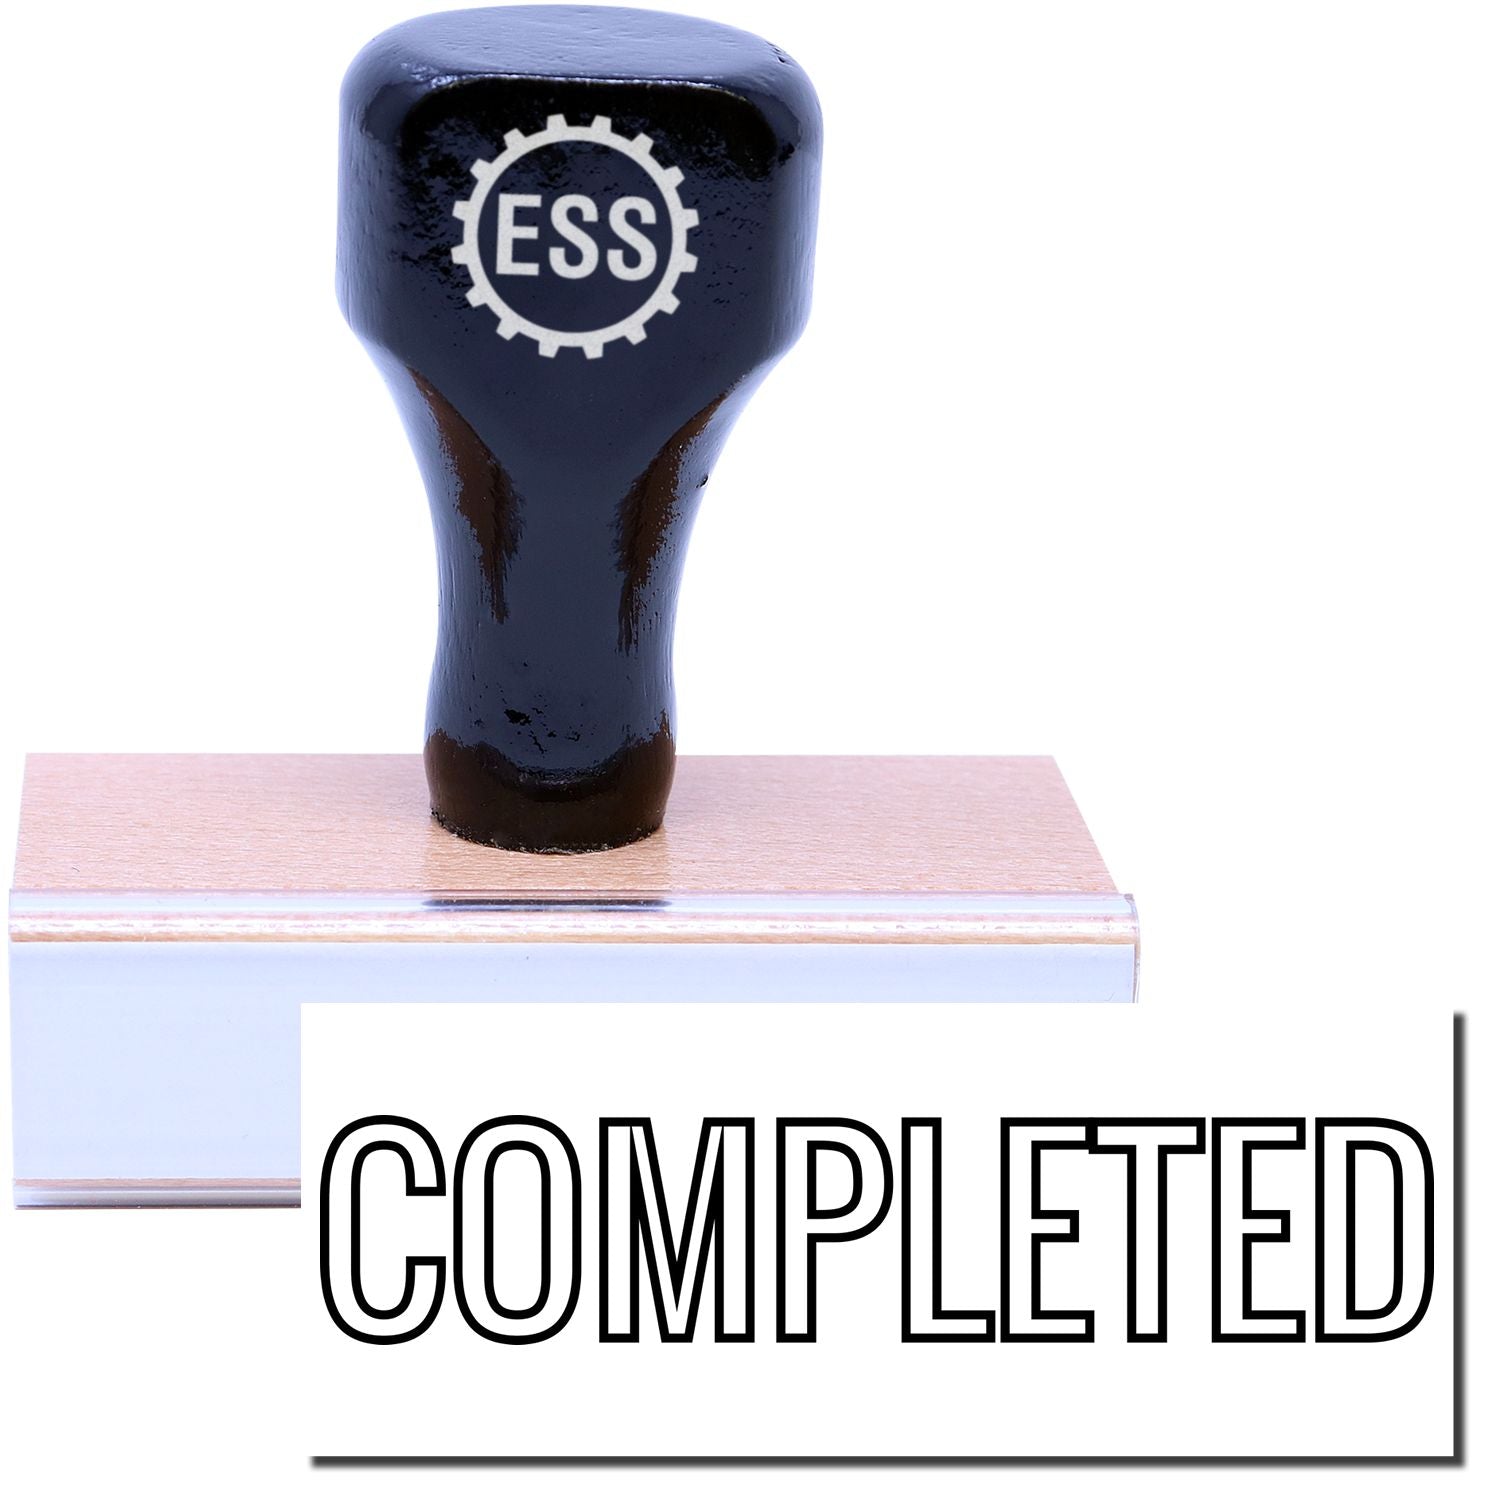 A stock office rubber stamp with a stamped image showing how the text "COMPLETED" in a large outline font is displayed after stamping.